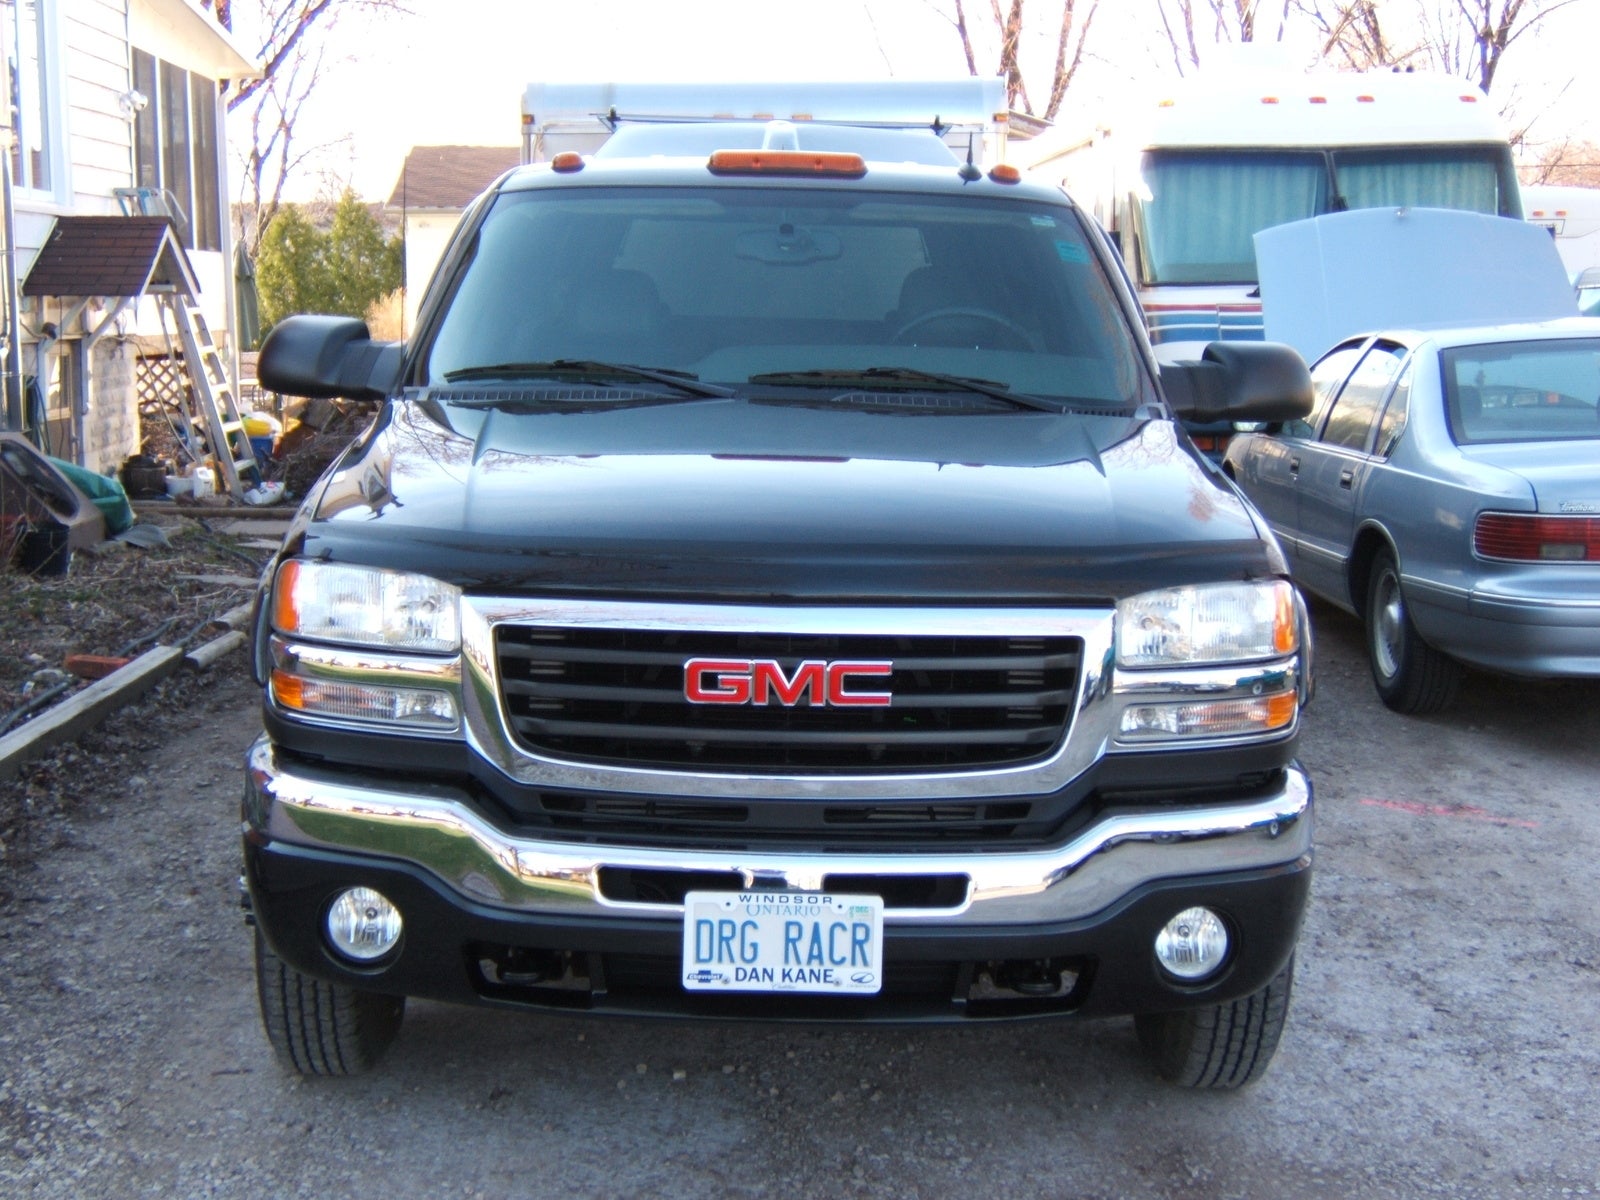 2004 Gmc specifications towing